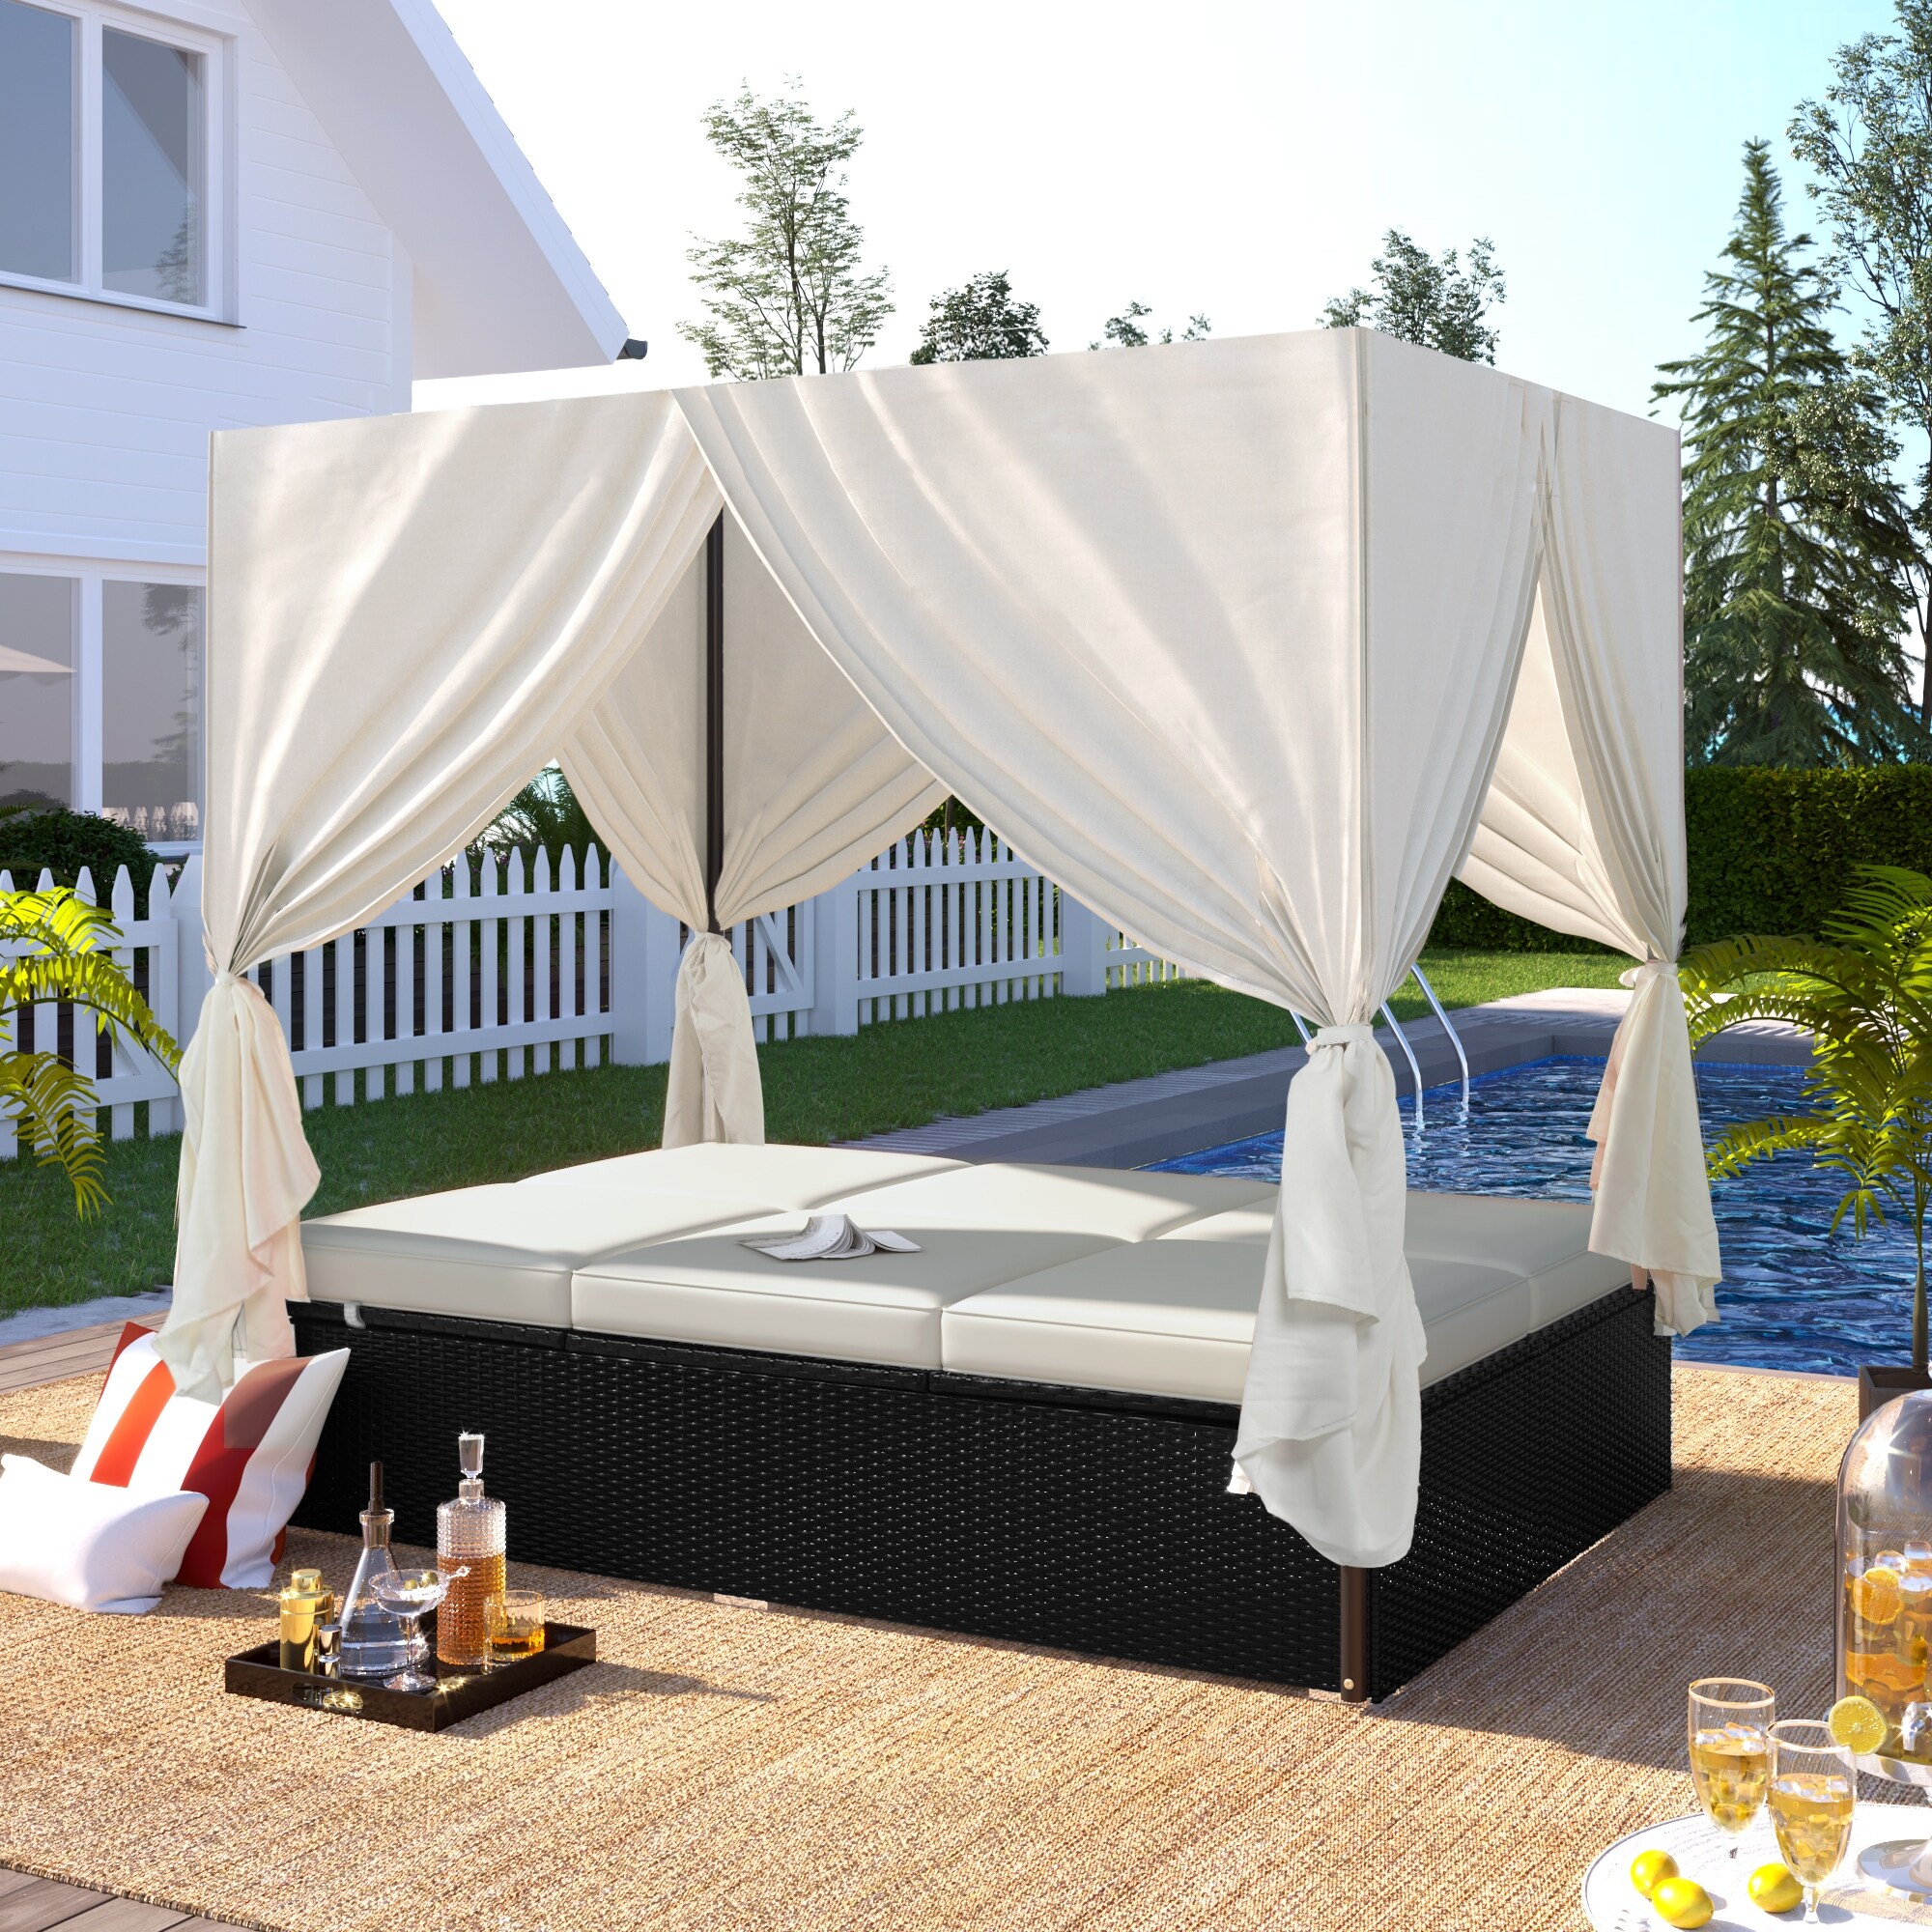 Outdoor Patio Wicker Sunbed Daybed With Canopy  Adjustable Seats  All-weather Pe Rattan Lounge Bed For Garden  Poolside  Balcony